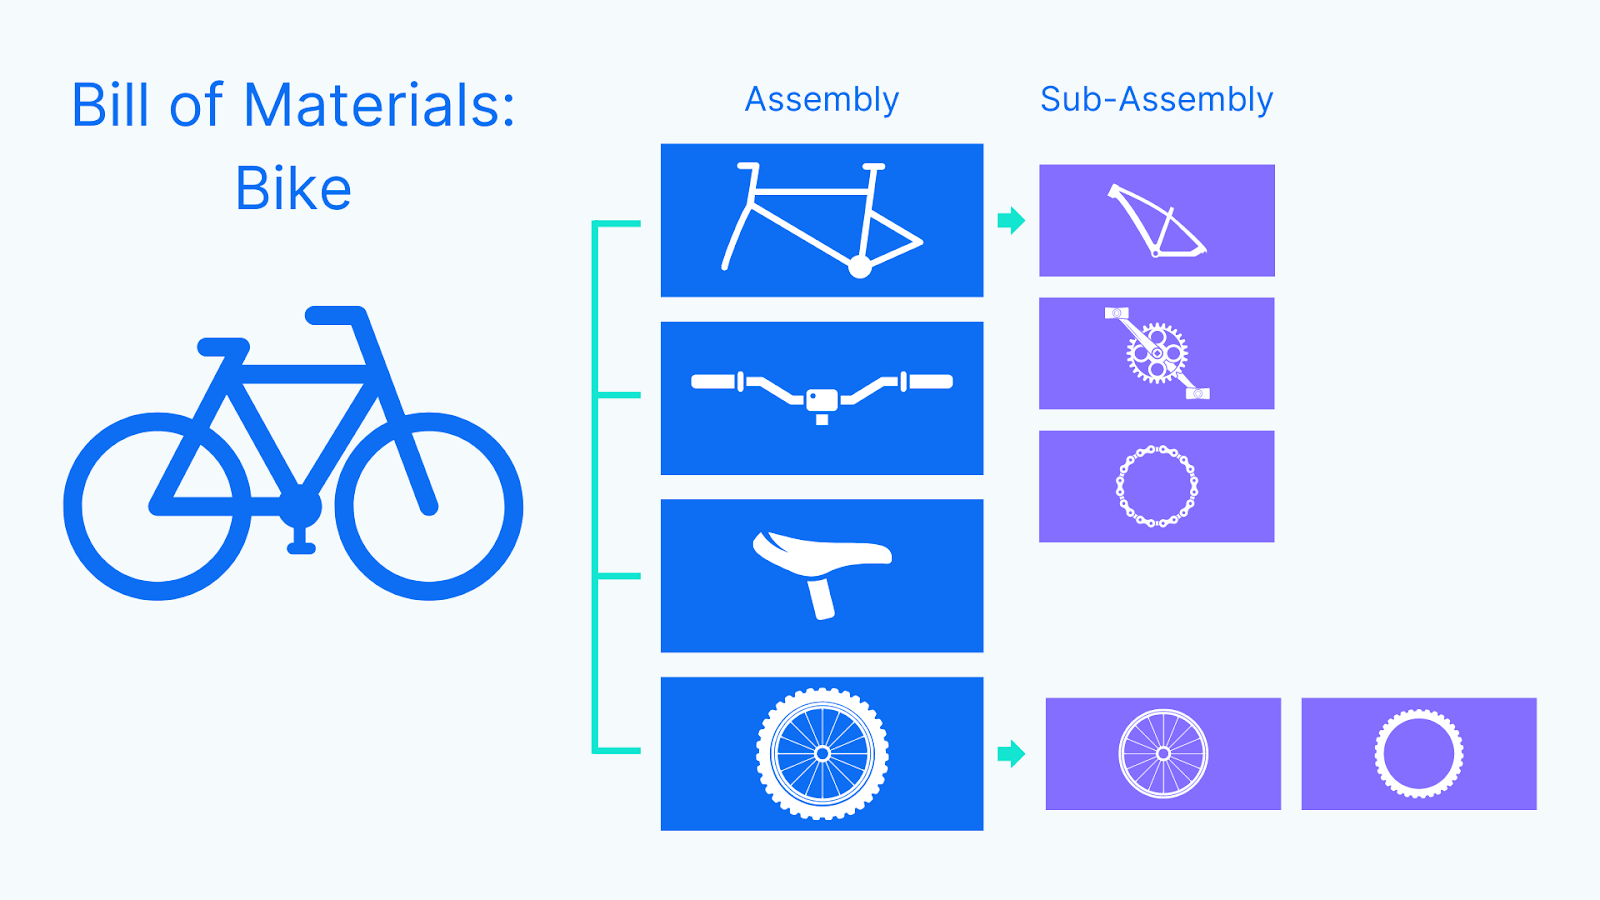 Bill of Materials (BOM) for a bike. The image is divided into two main sections: 'Assembly' and 'Sub-Assembly.' The 'Assembly' section lists the main components of the bike, including the frame, handlebars, seat, and wheels. The 'Sub-Assembly' section breaks down these components further. For the frame, there are three sub-components: the frame structure, the crankset, and the chain. For the wheels, there are two sub-components: the wheel itself and the tire. Each component and sub-component is represented with simple line drawings. A green line connects the 'Assembly' components to their respective 'Sub-Assembly' parts.